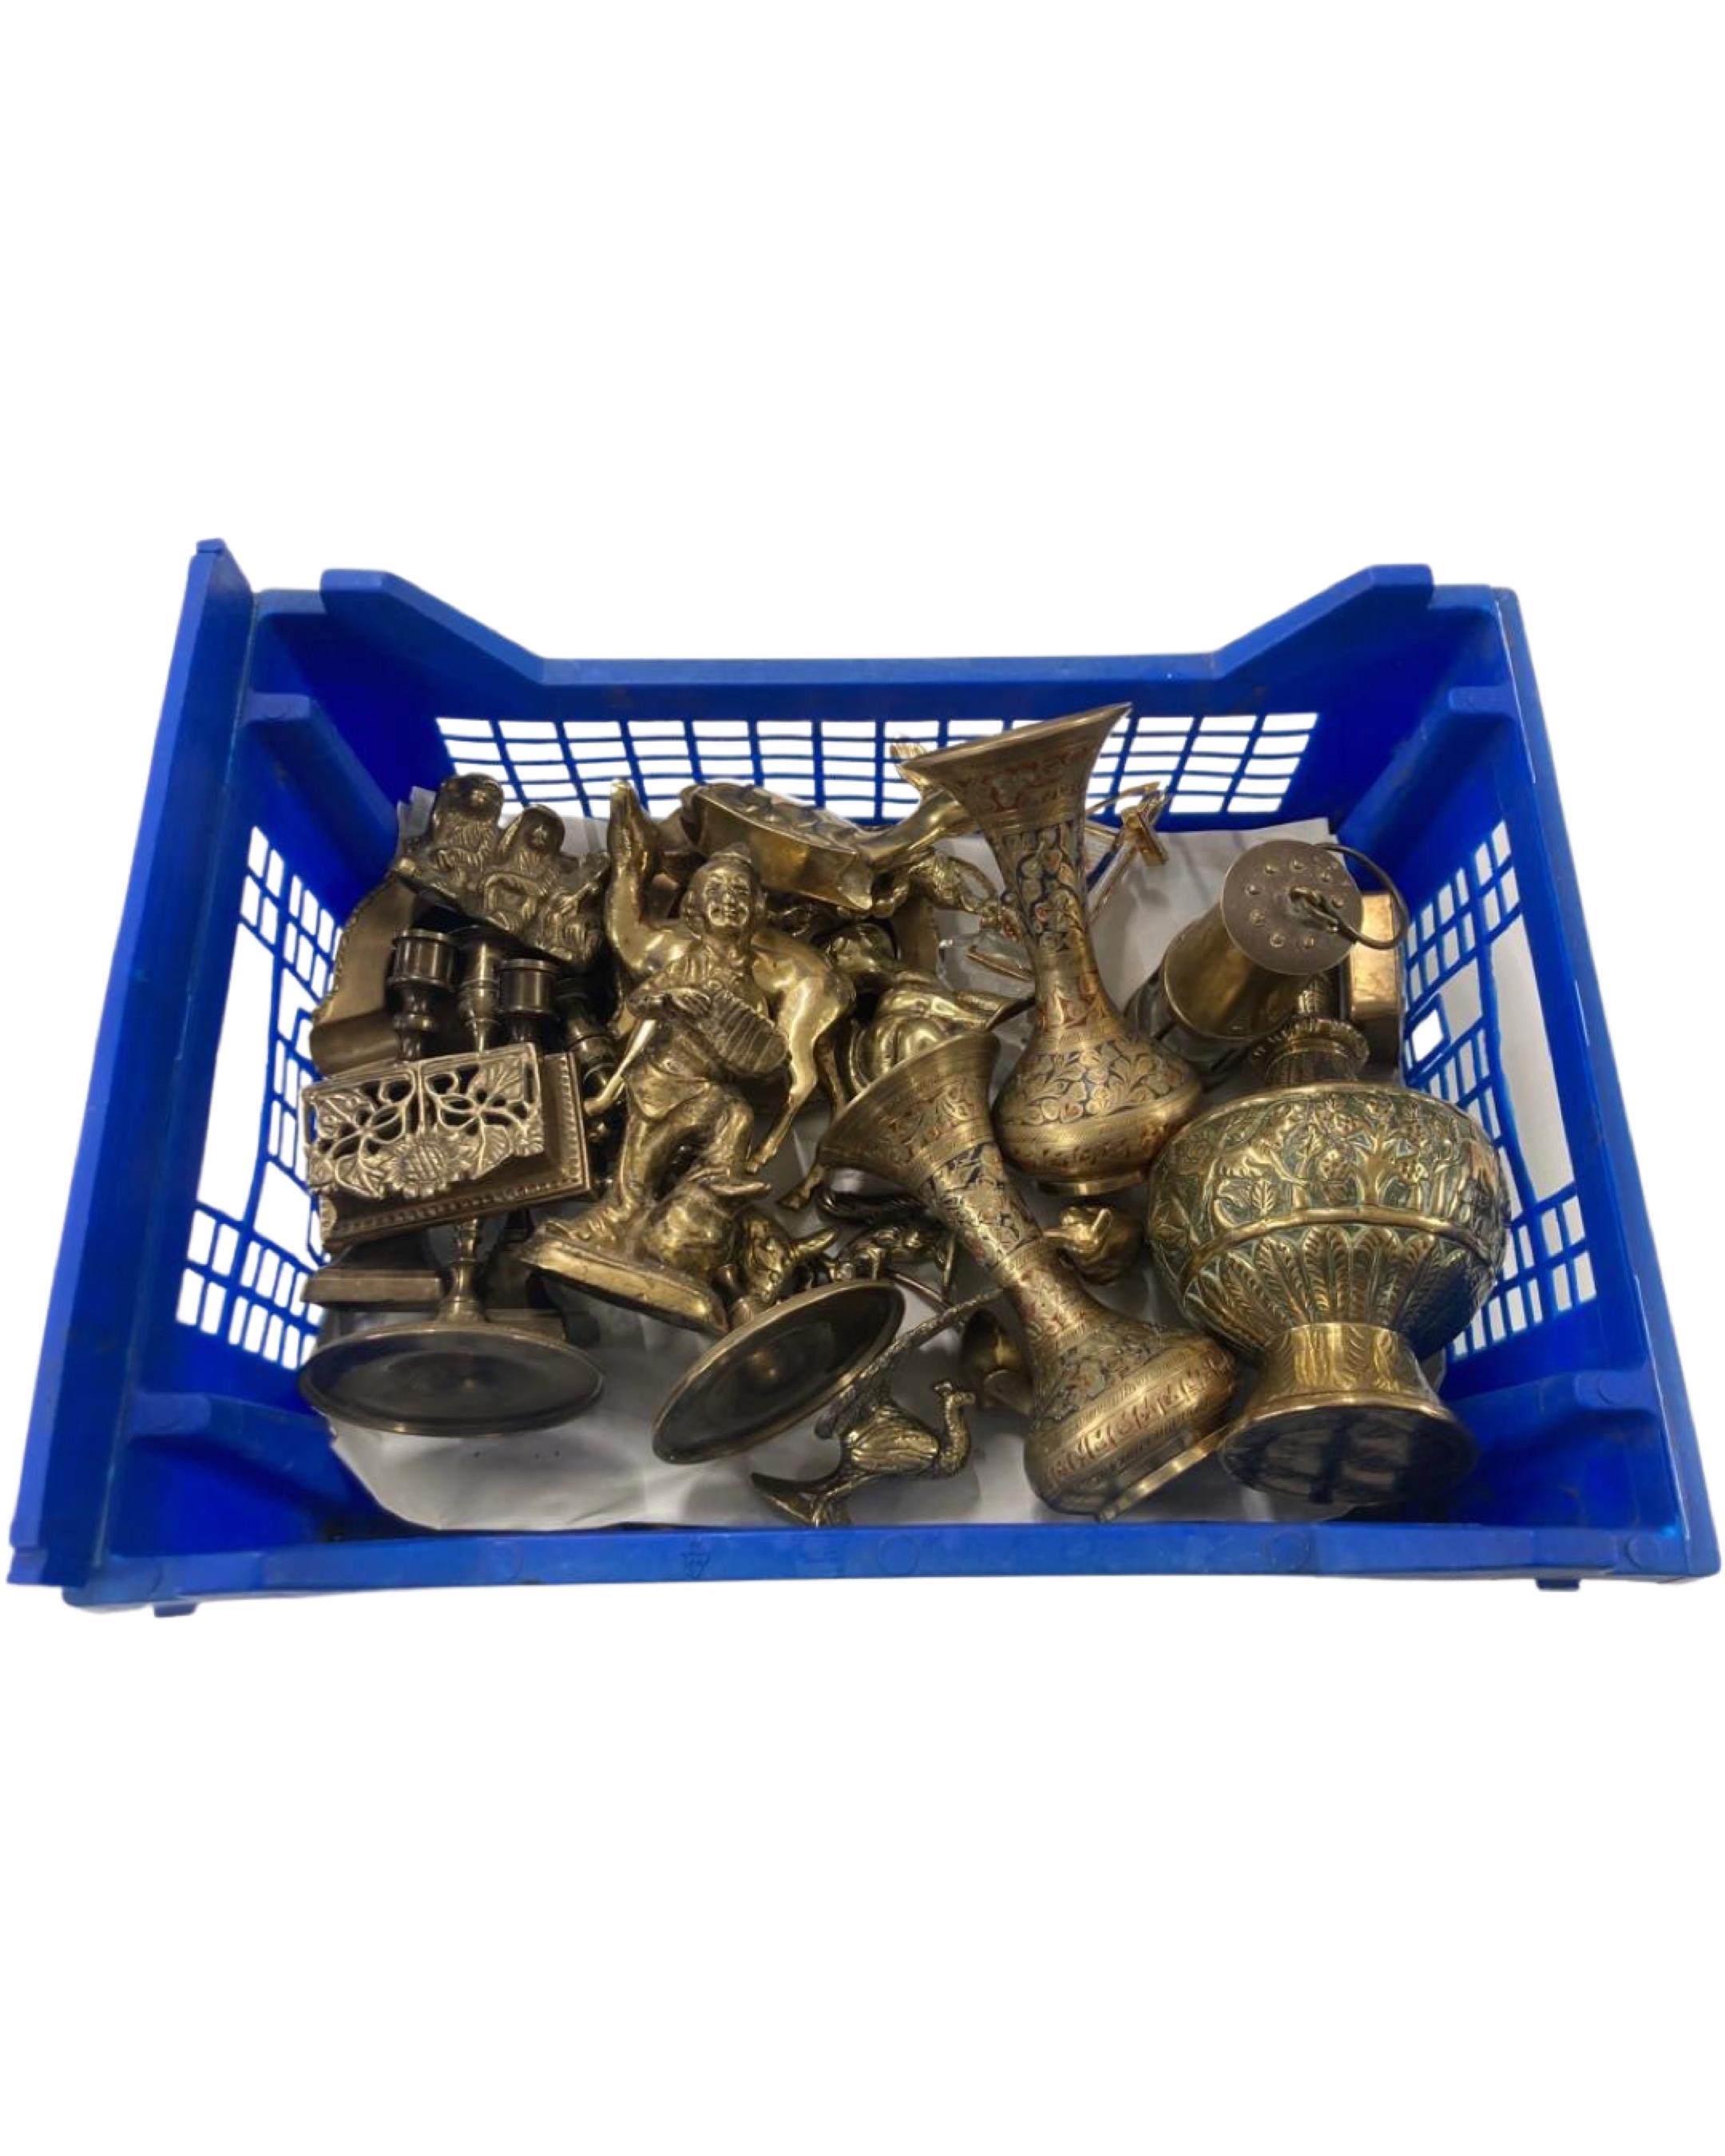 A crate of brass ornaments, a miner's lamp, brass figures, candlesticks etc.